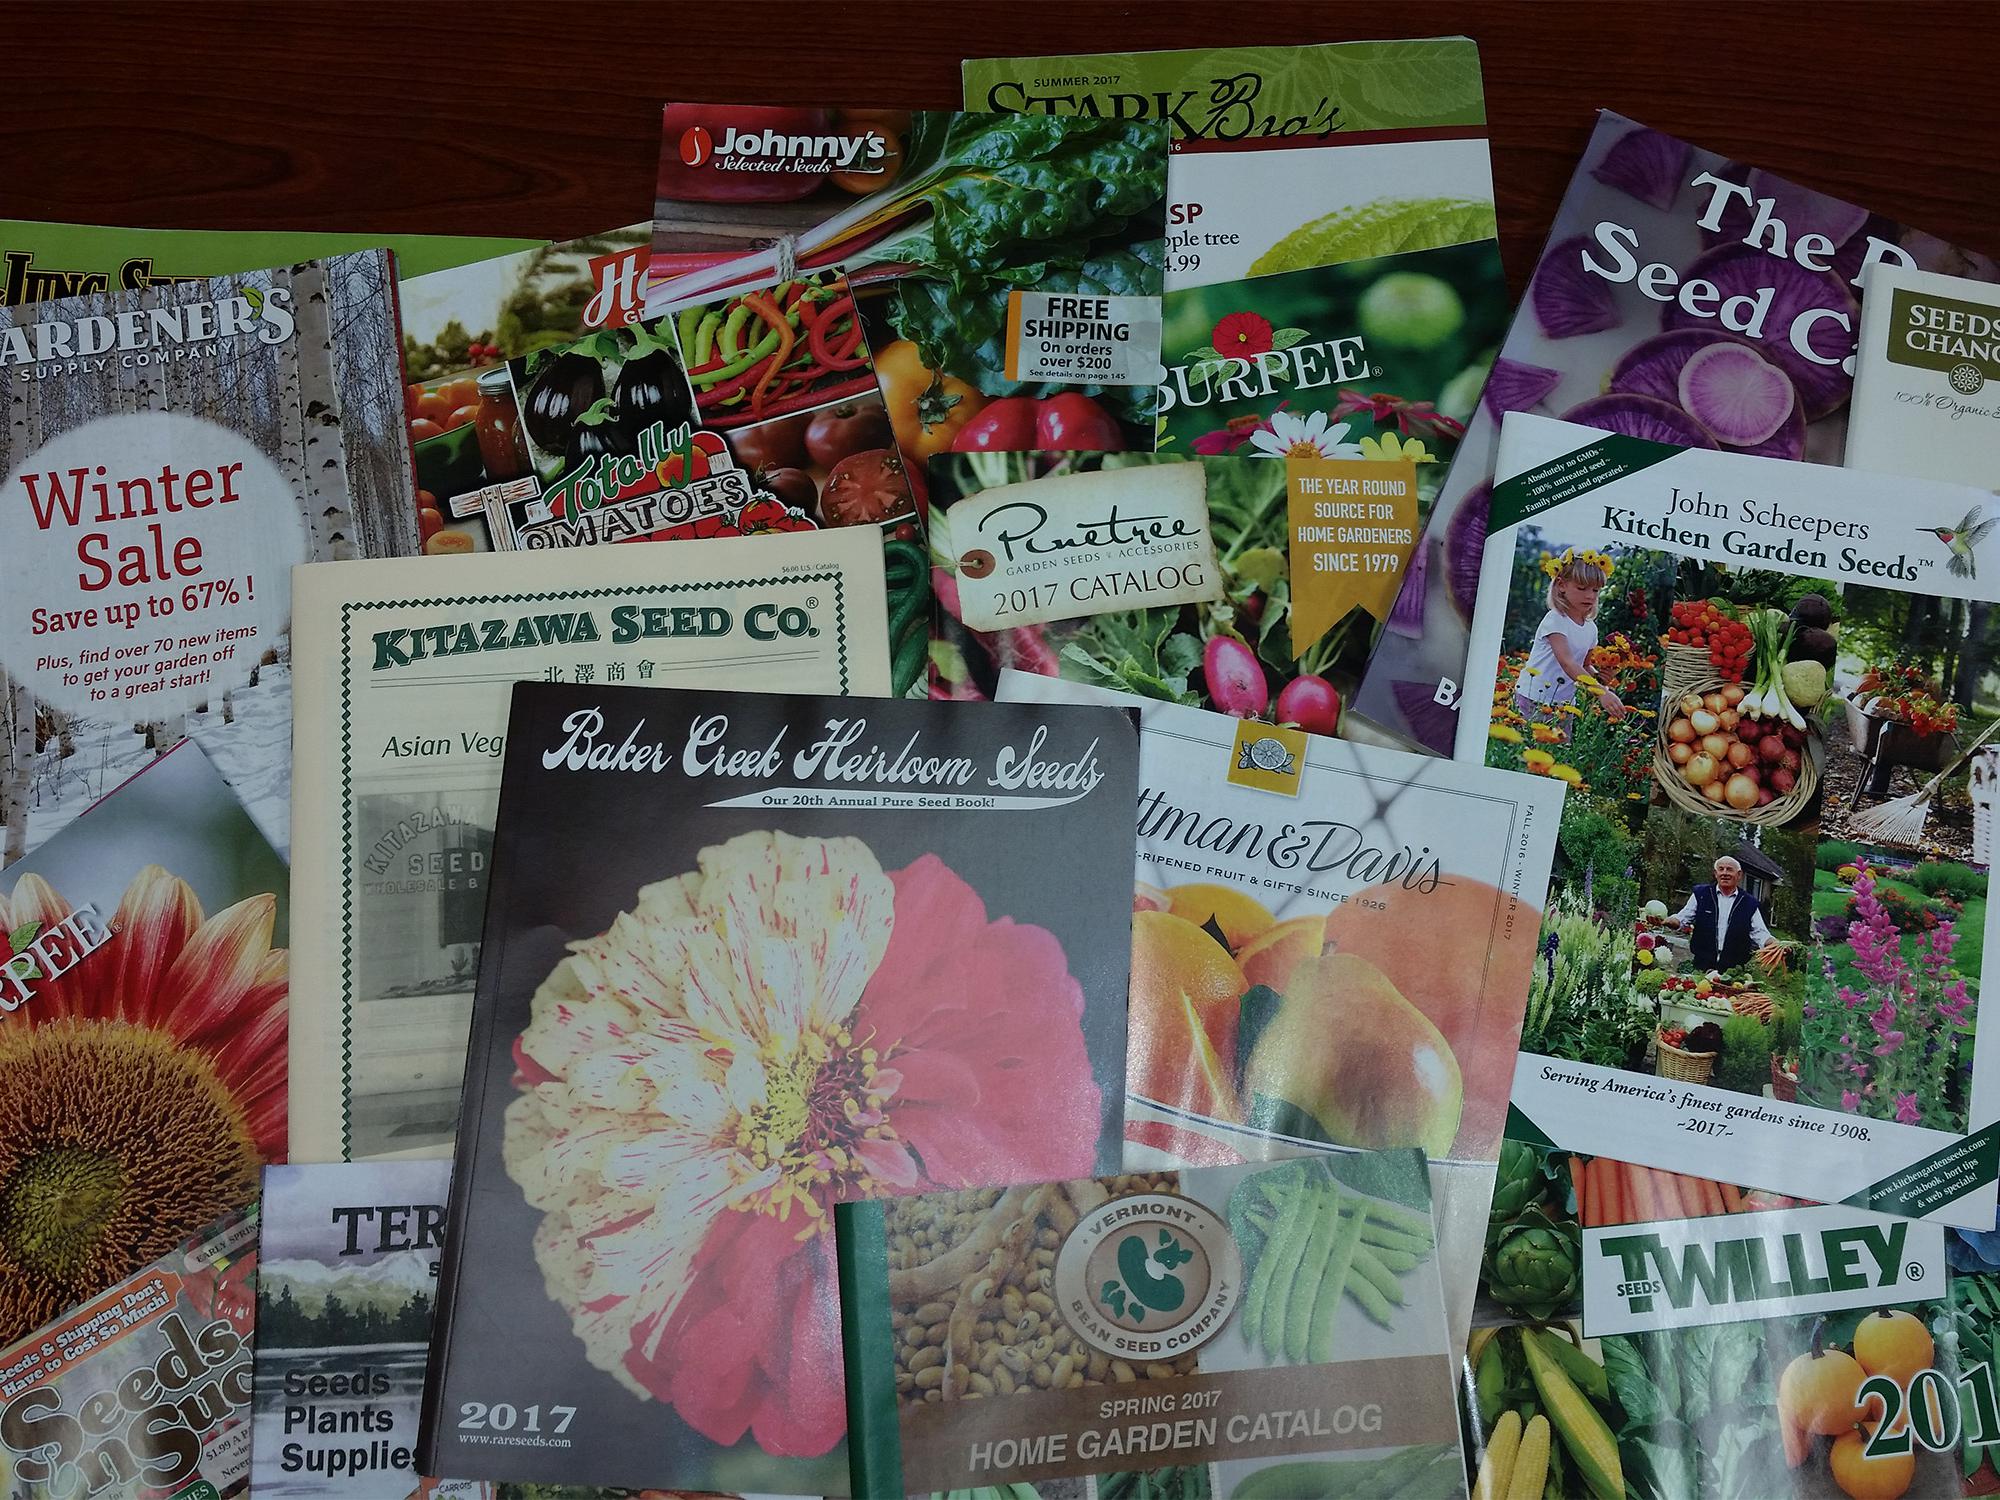 The colorful covers of about 20 gardening catalogs are fanned out on display.